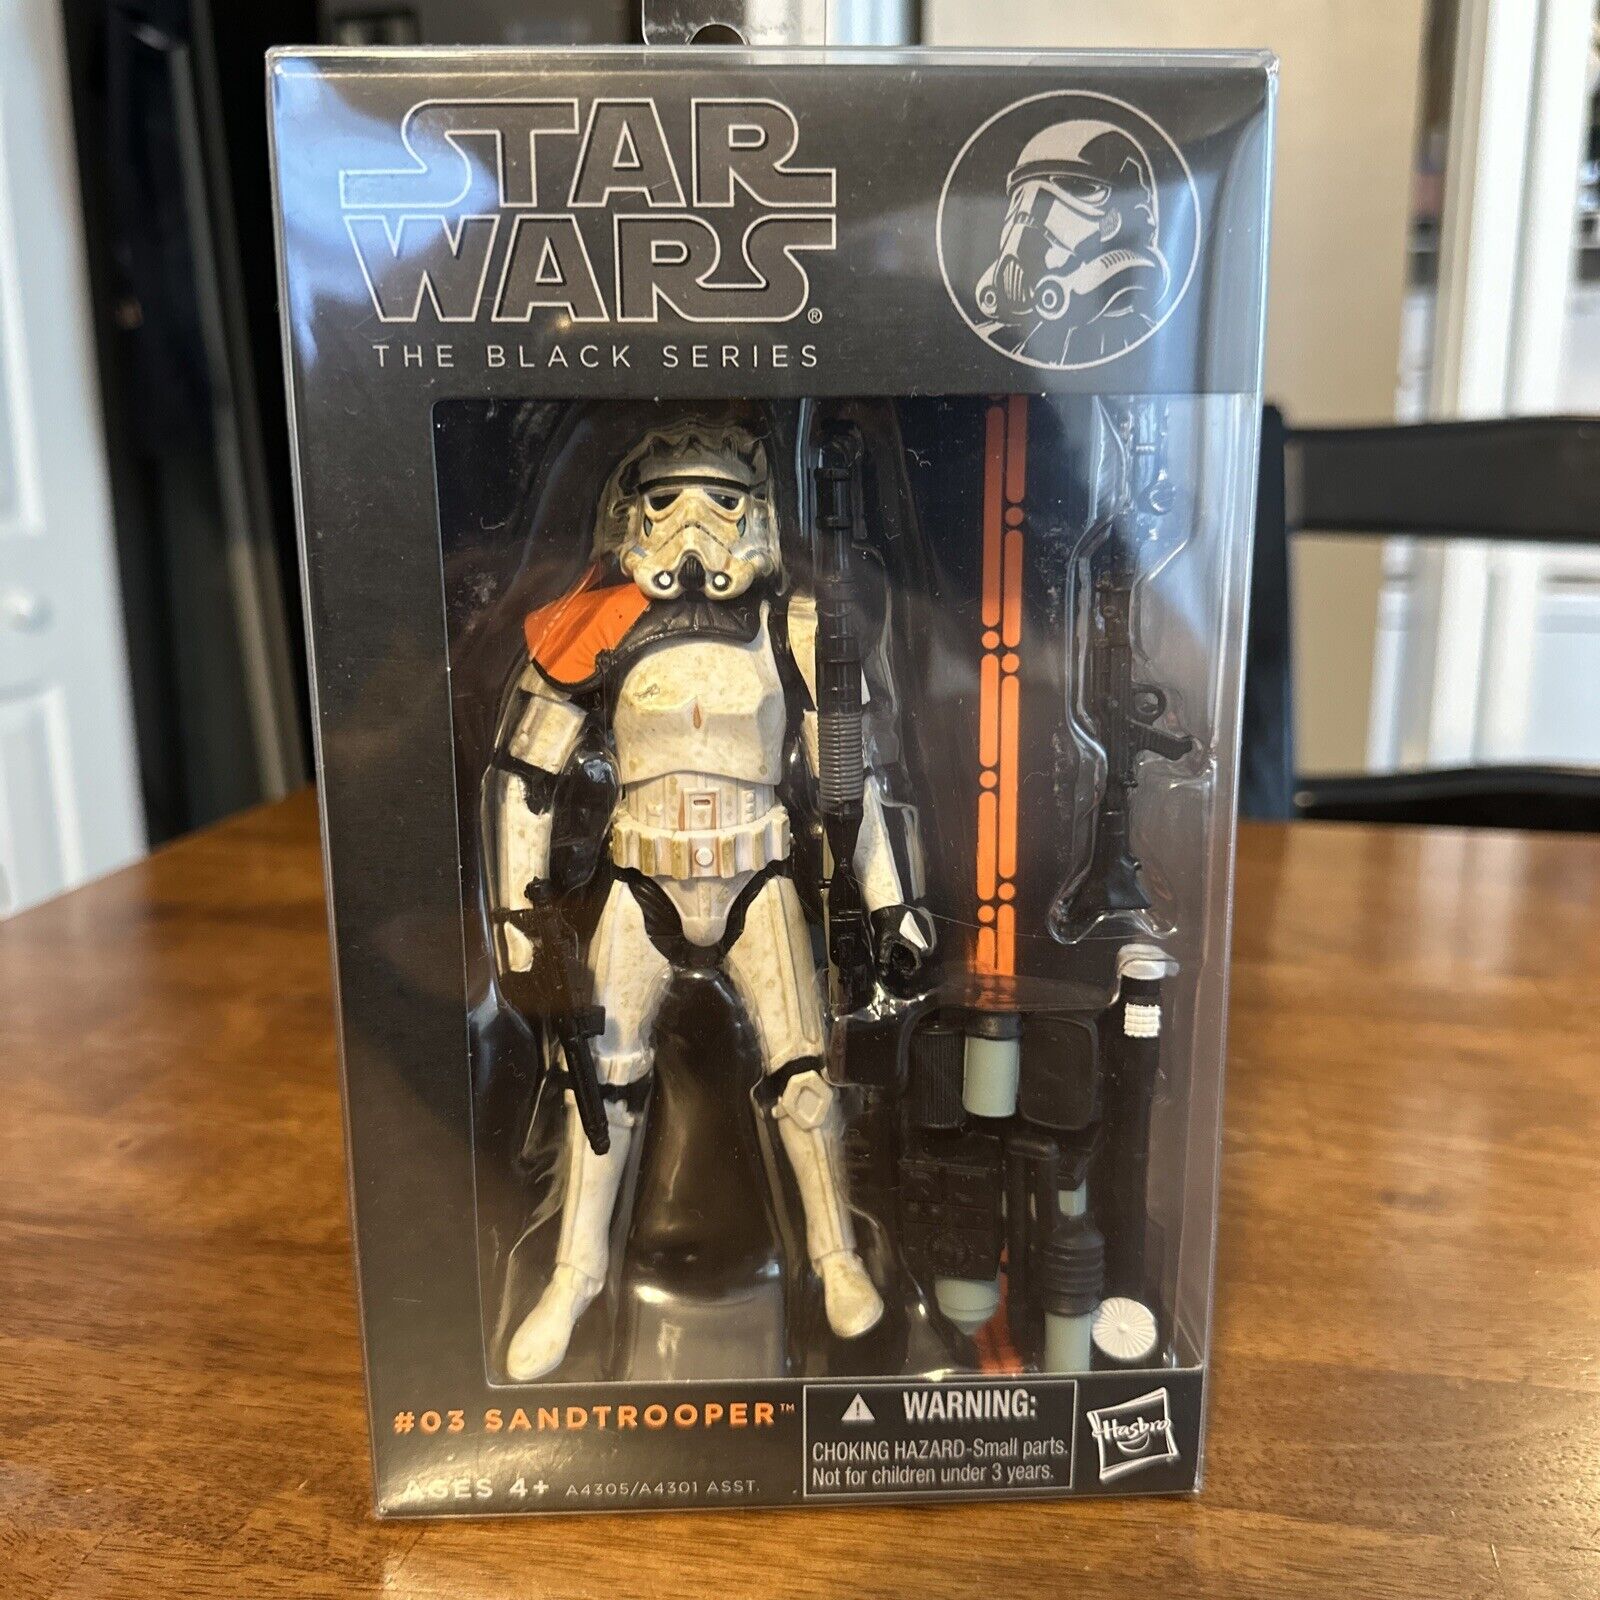 2013 Star Wars The Black Series Imperial Sandtrooper #03 In Protective Case